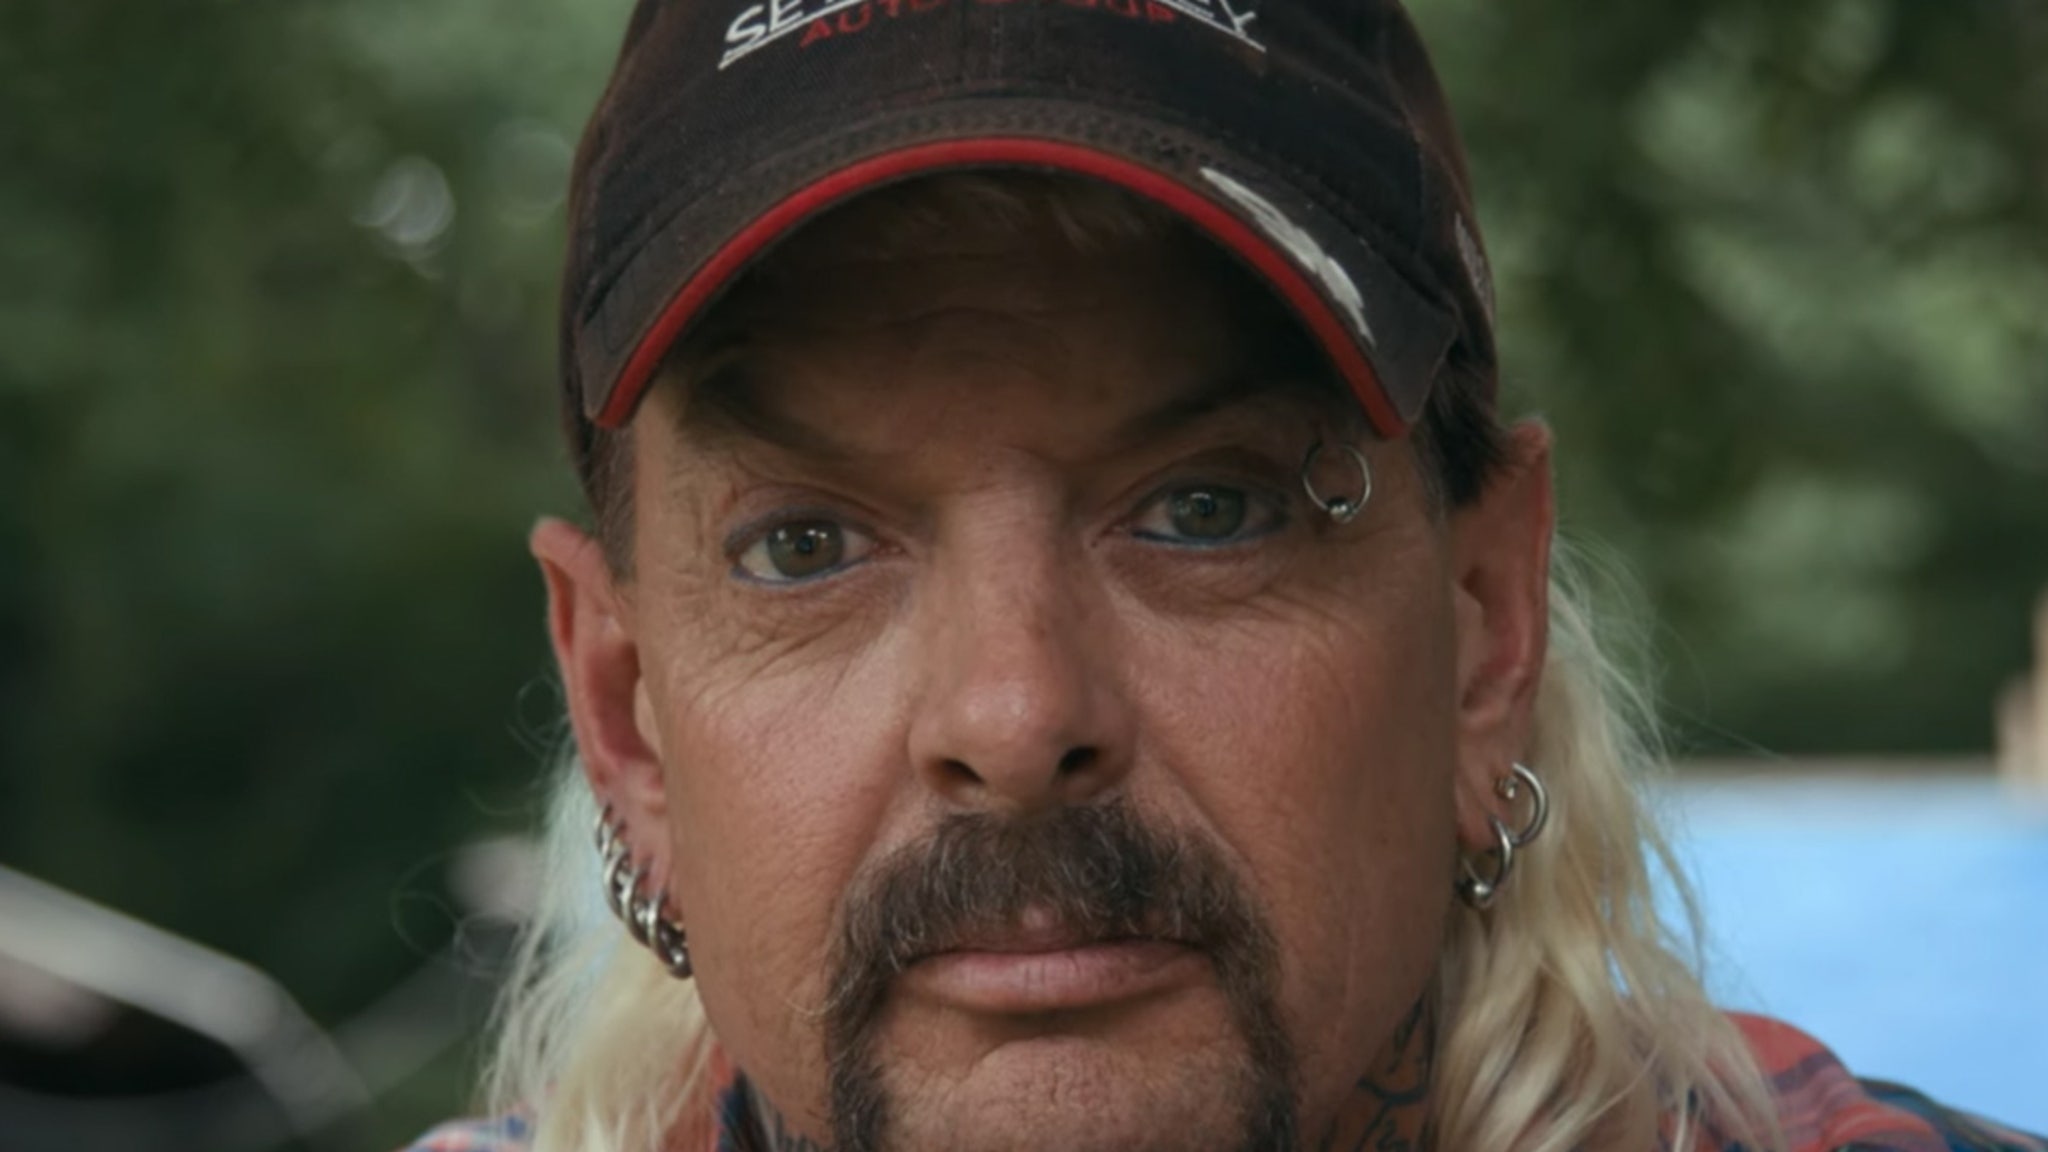 Joe Exotic says the year since ‘Tiger King’ fell ‘hell’ was